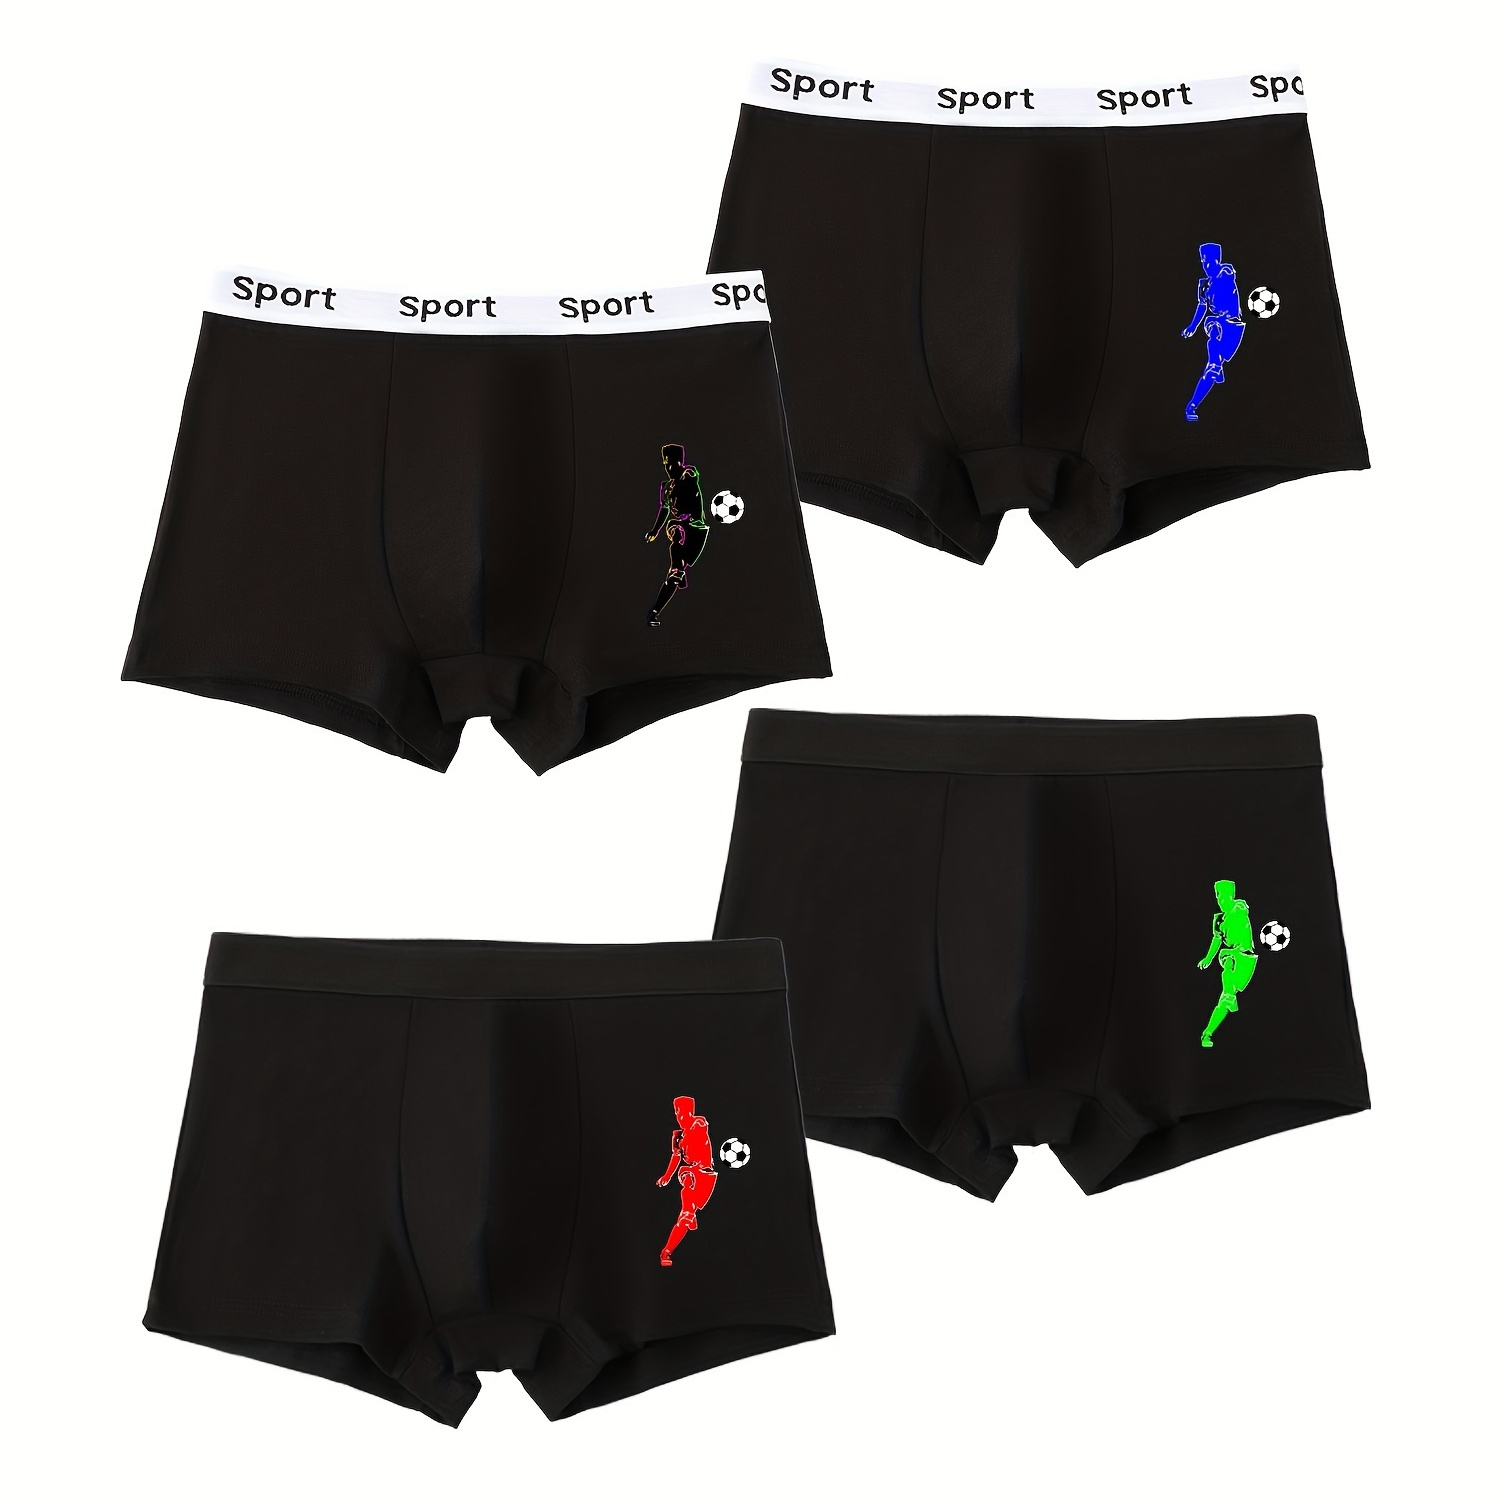 

4pcs Teen Boys Sports Boxer Briefs, Fashion Soccer Print Cotton Underwear, Breathable Soft Athletic Trunks For Kids Teenagers Students